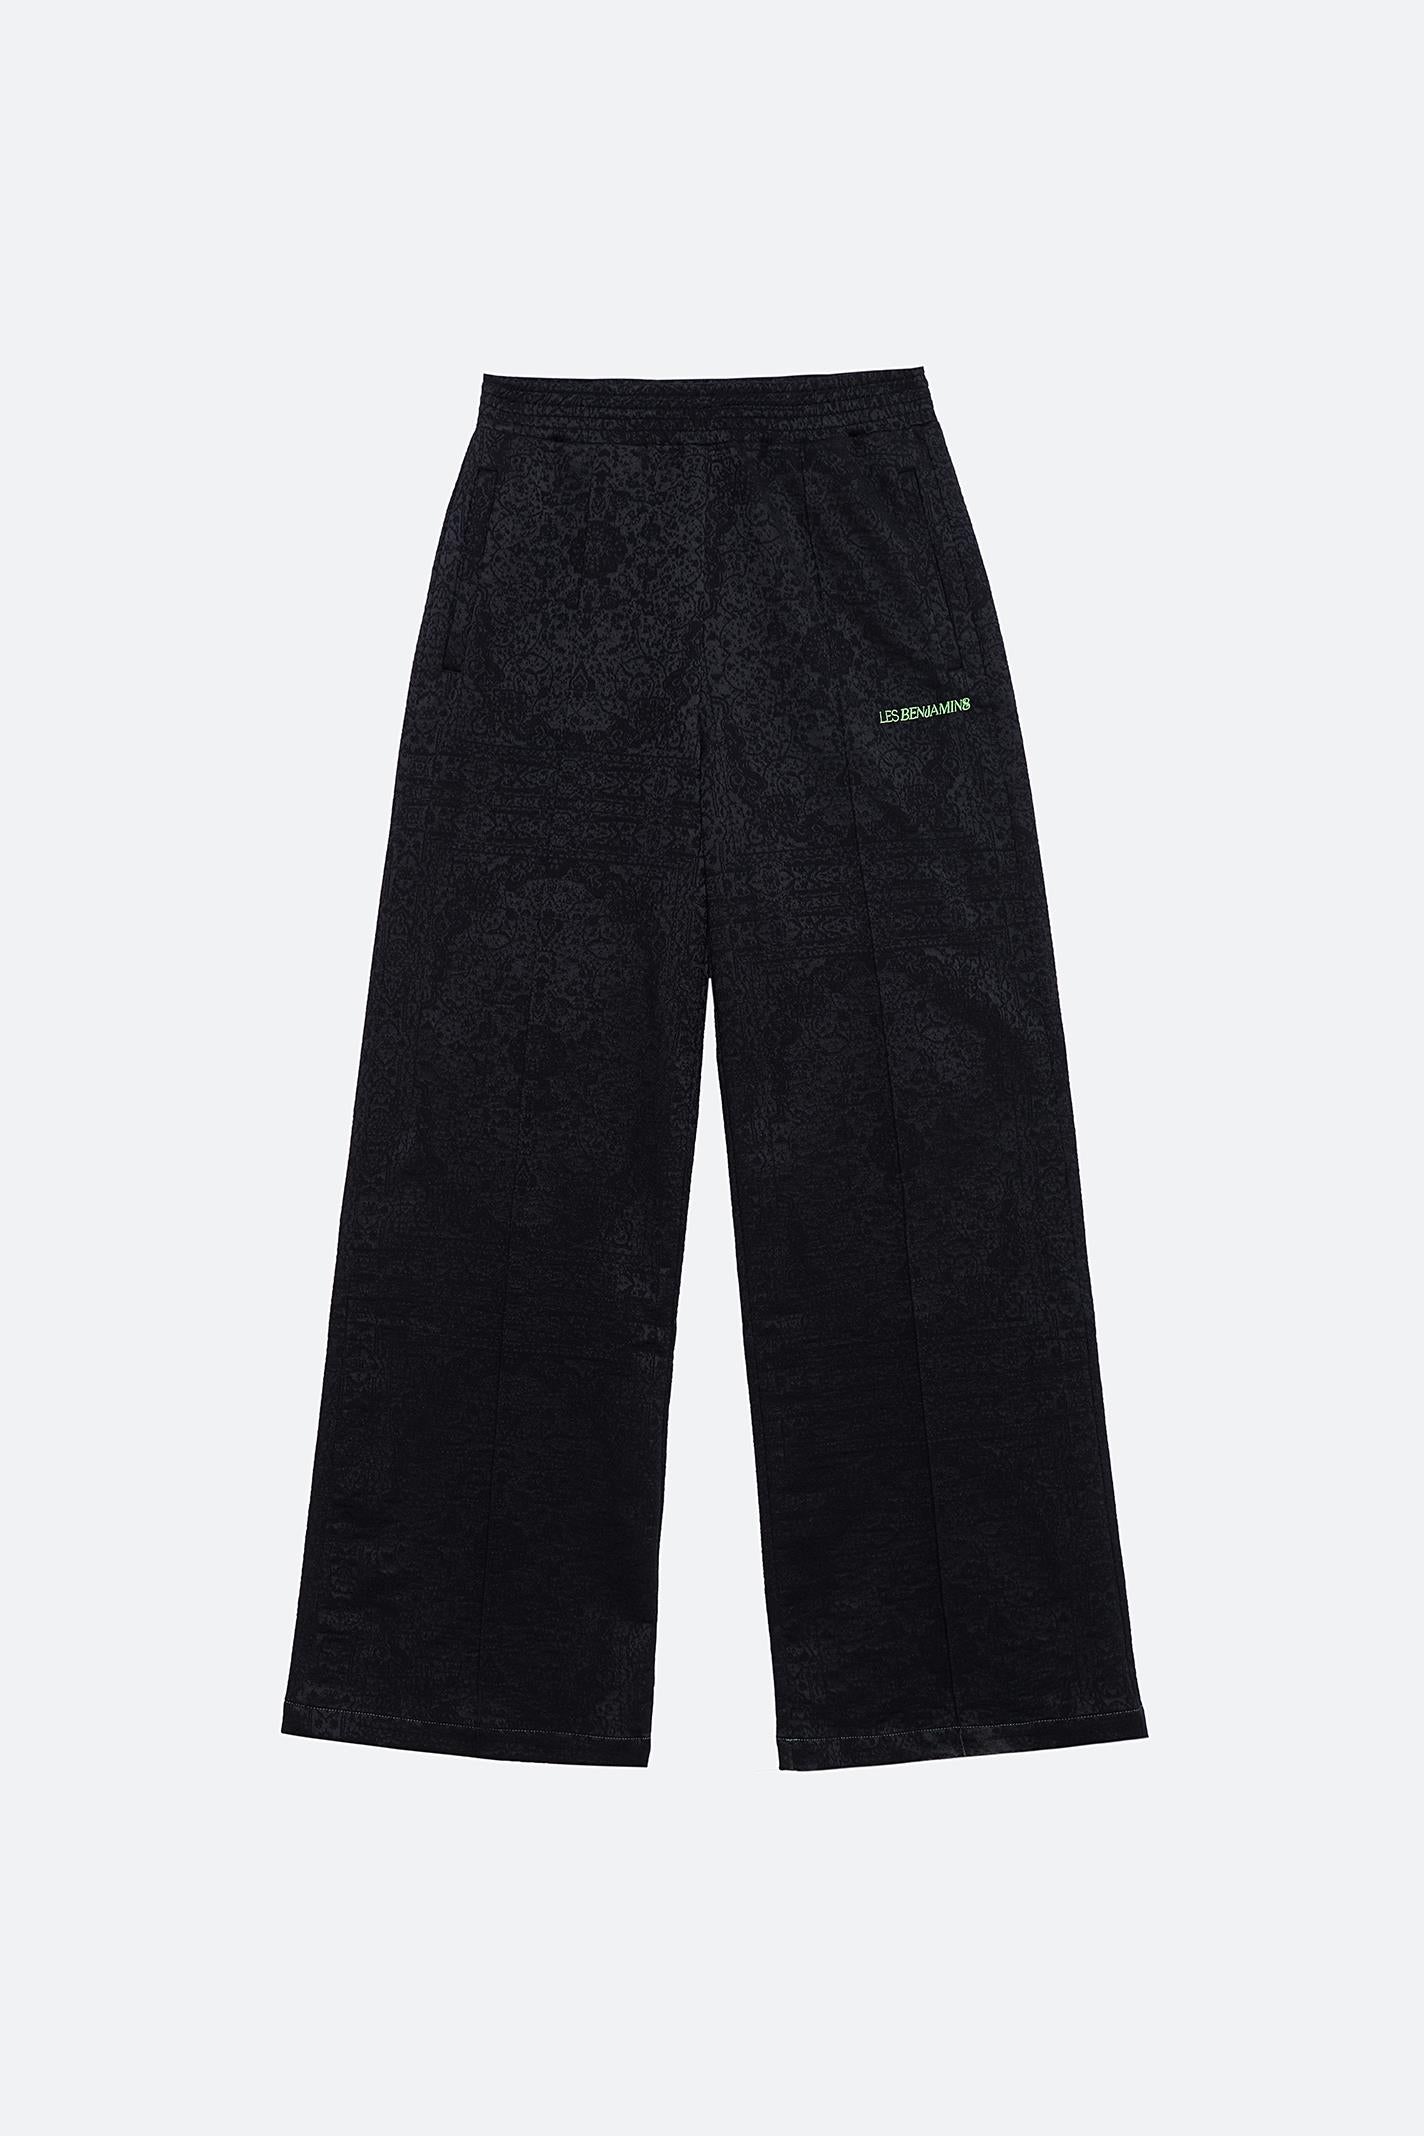 RELAXED SWEATPANT 007